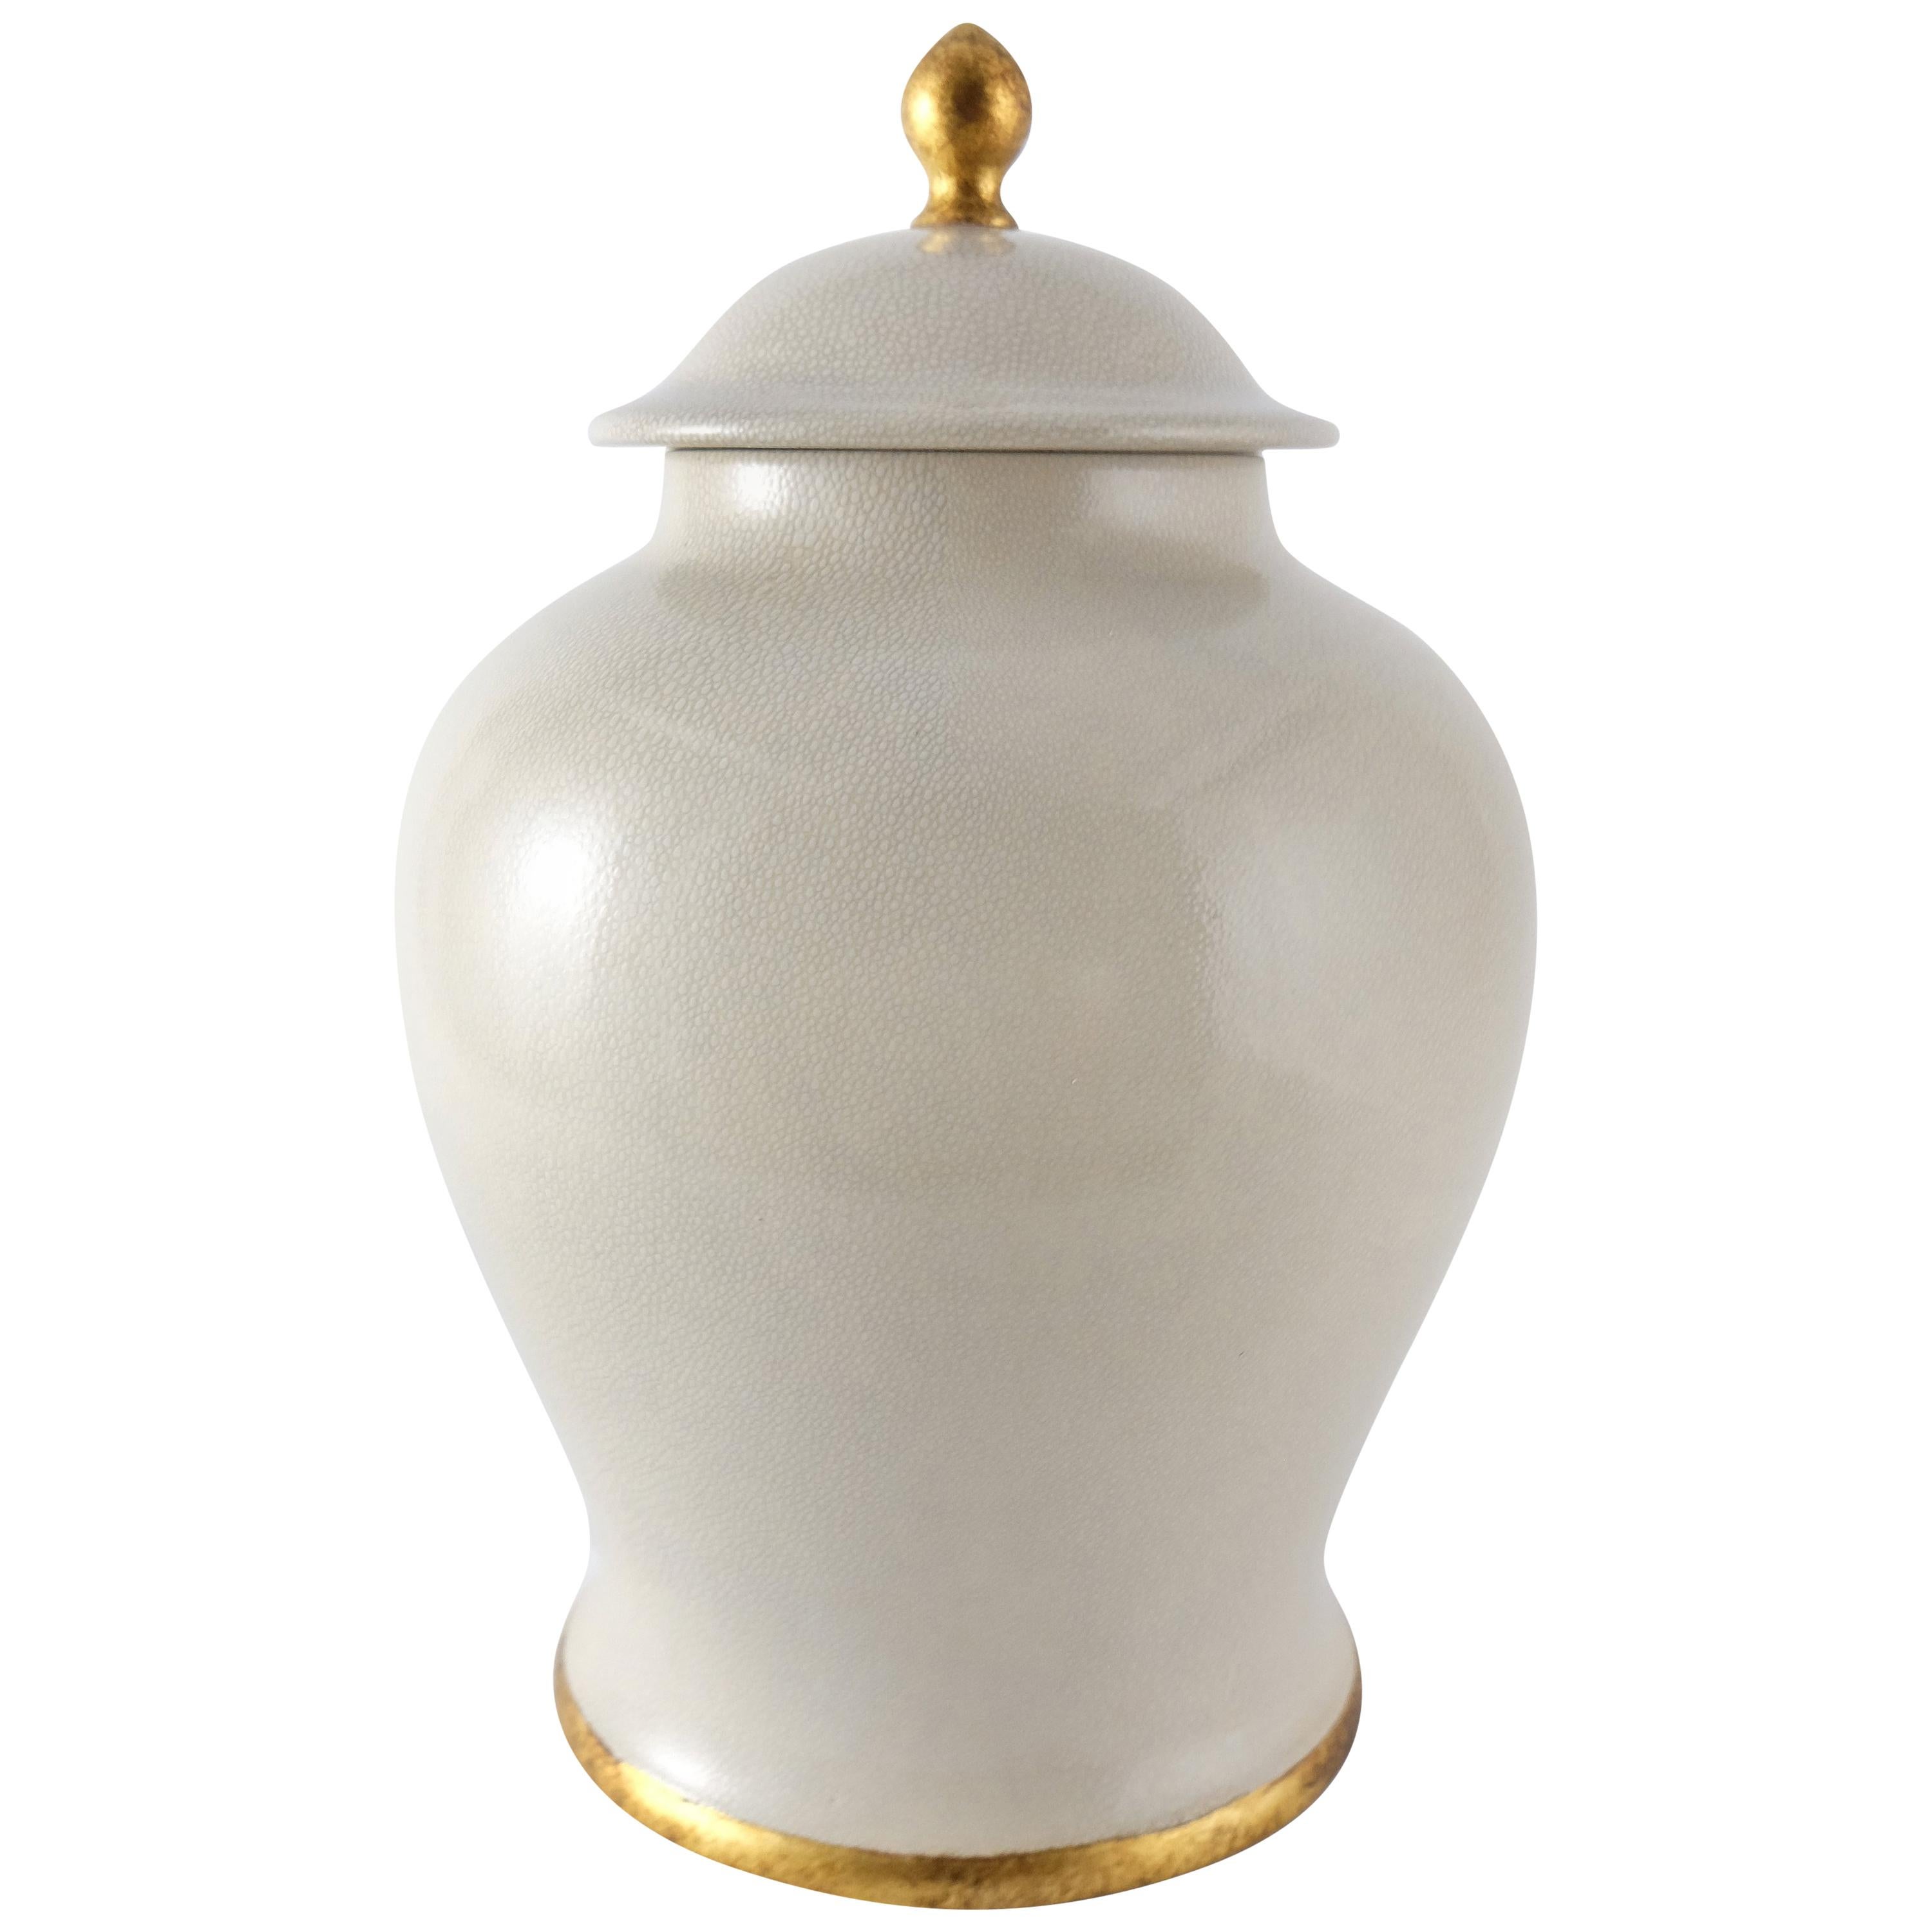 Paolo Marioni Italian Glazed Ceramic Jar with Gold-Leaf Accents

Offered for sale is a glazed ceramic lidded ginger jar by Paolo Marioni. The jar has a subtle crazed-glaze finish and is accented in gold-leaf. The jar is signed on the base.


 